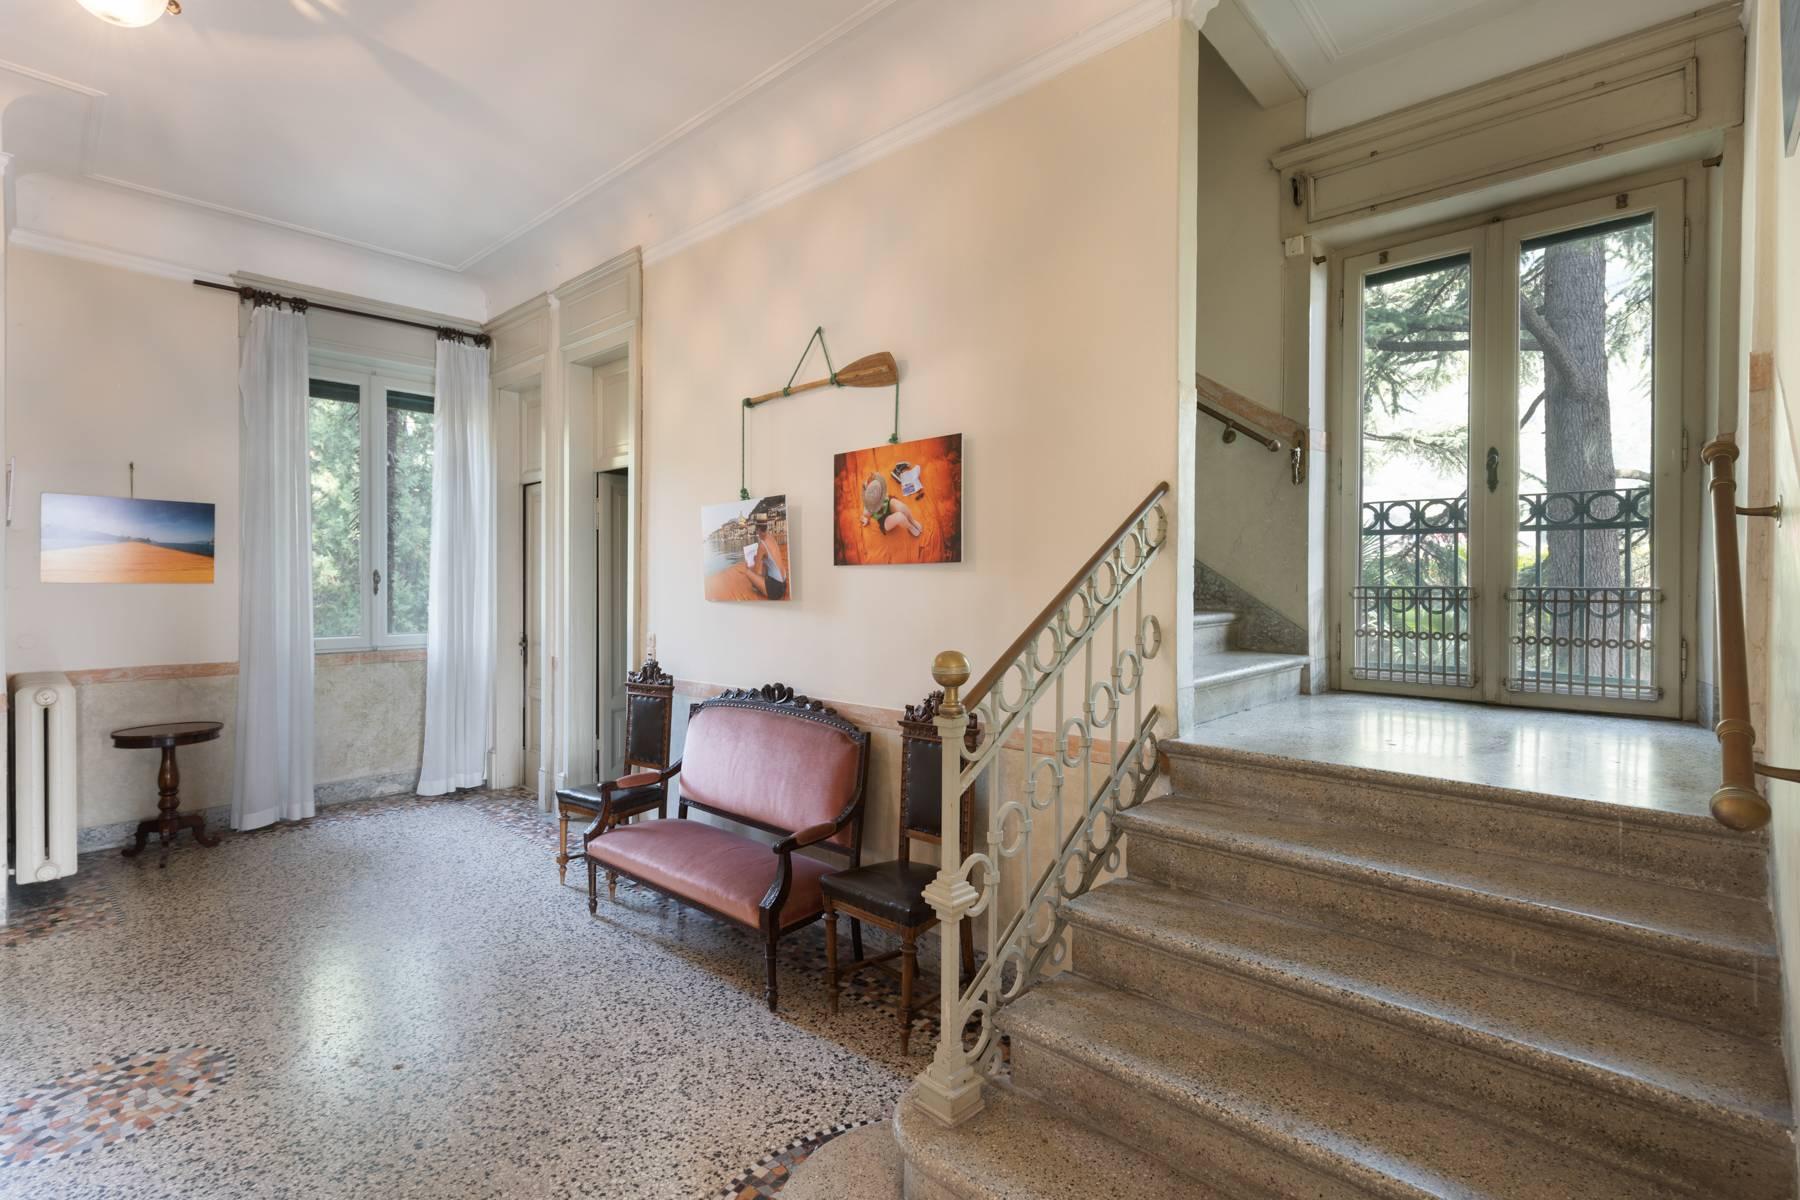 Stunning villa pieds dans l'eau with magnificent park and dock on Lake Iseo - 19